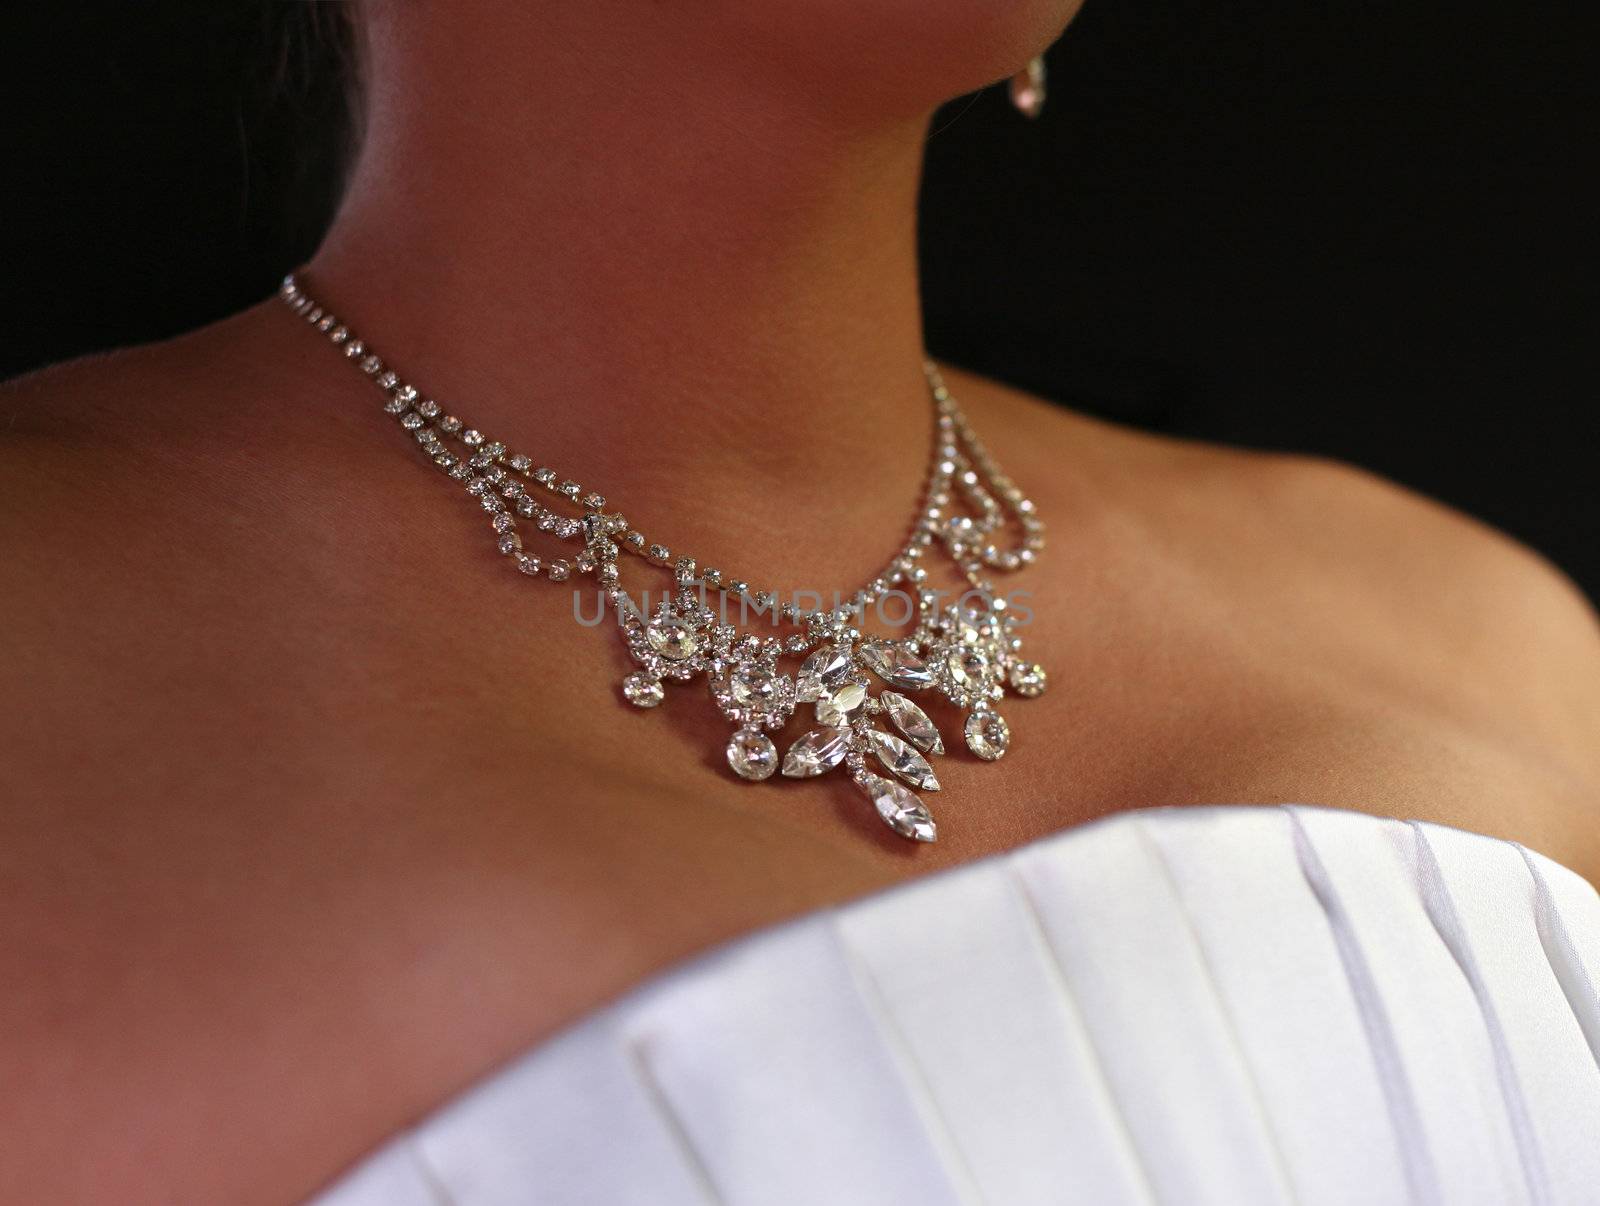 Wedding diamond necklace on a neck of the bride